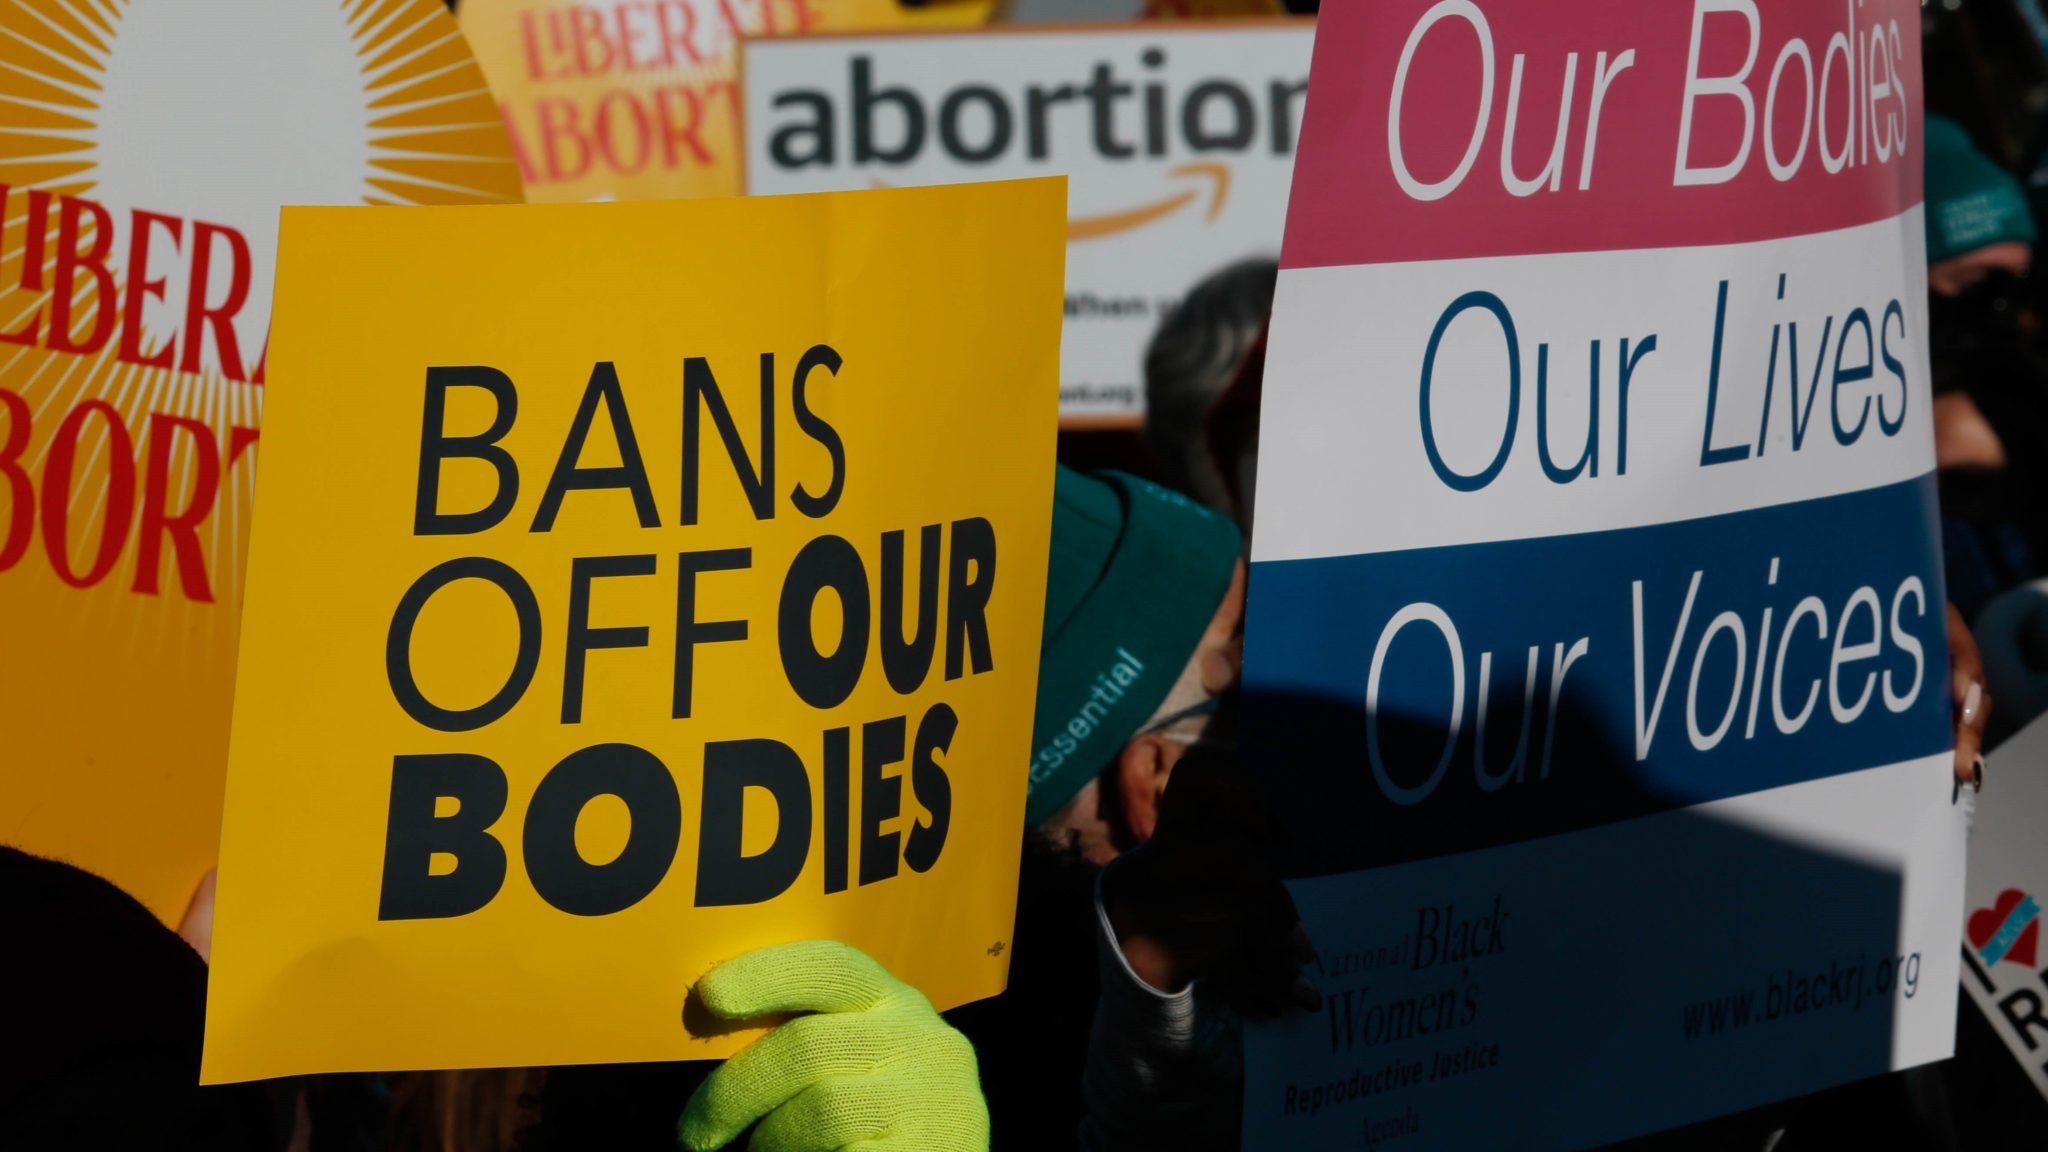 bans-off-our-bodies-rally-sign-scaled-aspect-ratio-16-9